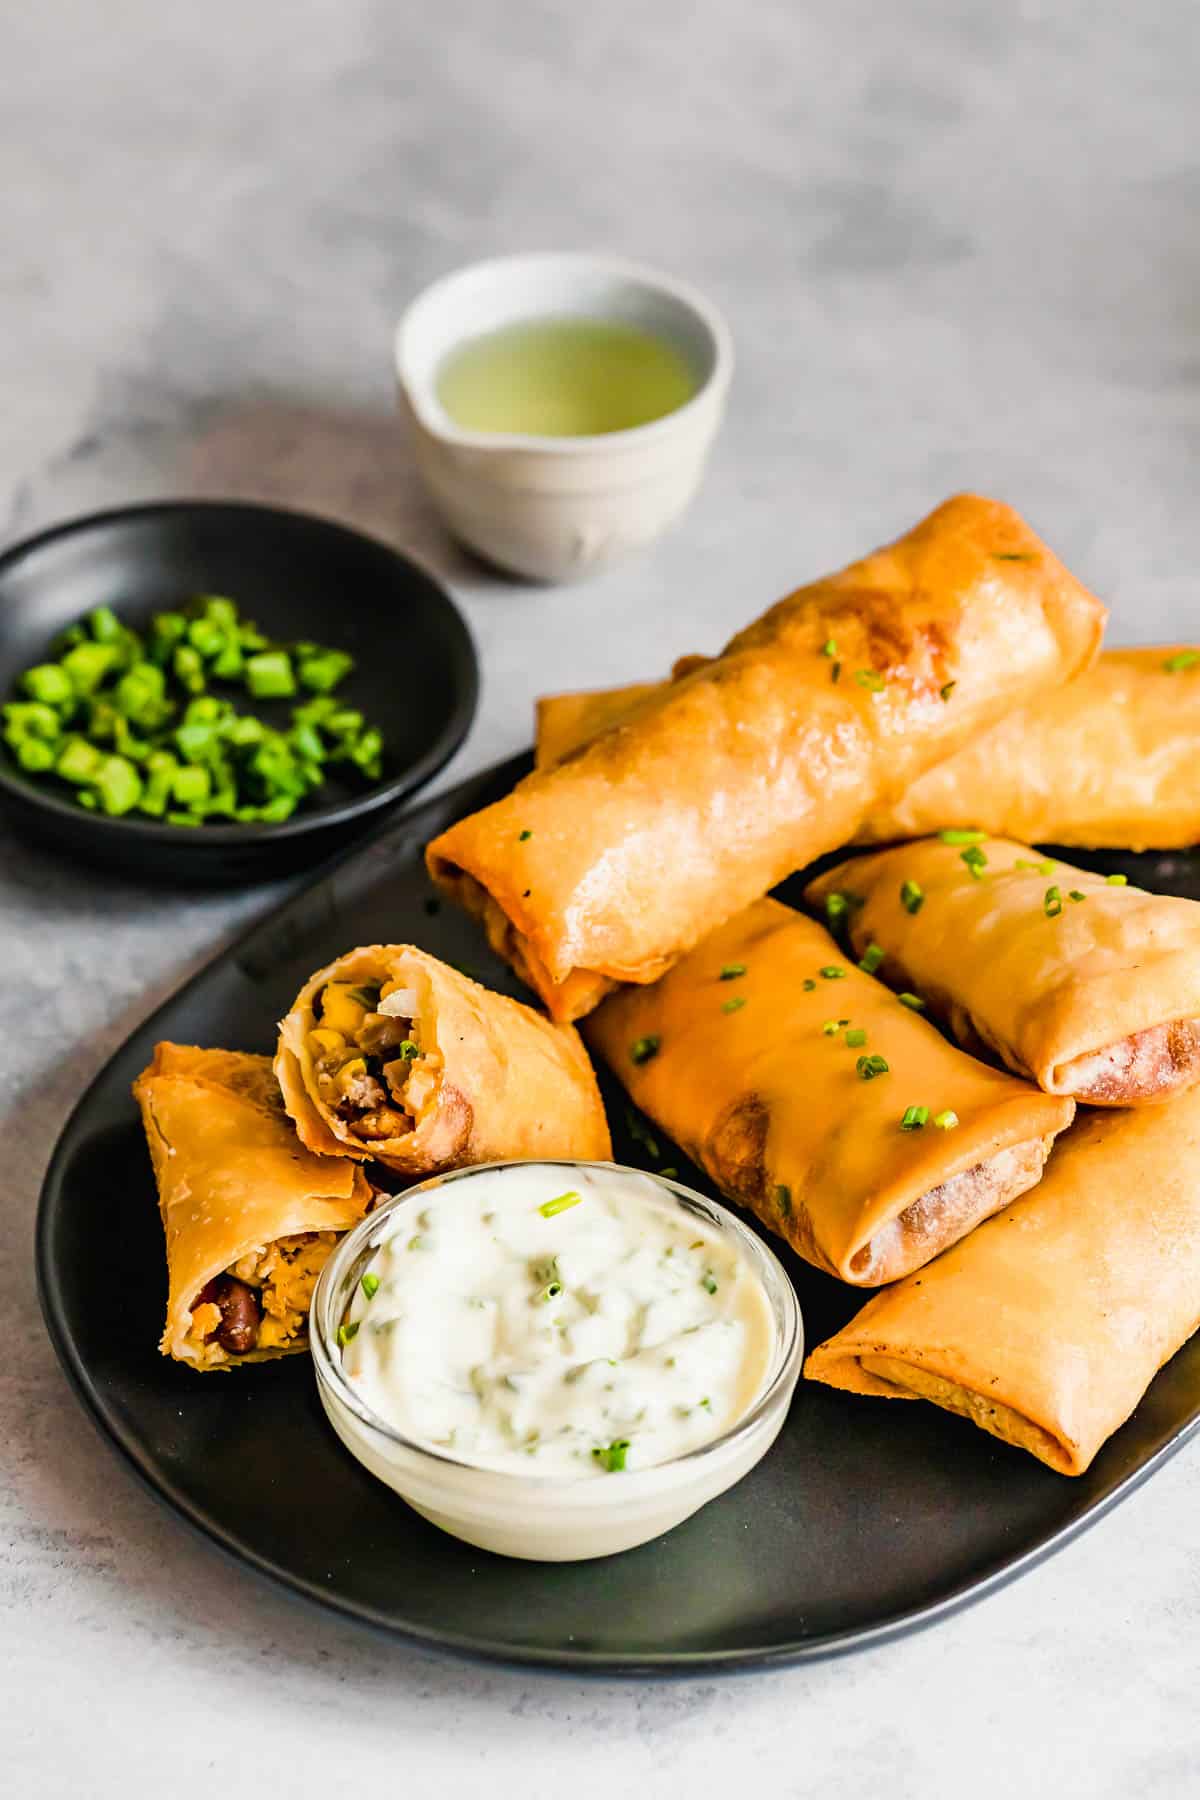 A Plate of Egg Rolls with a Glass Dish of Dipping Sauce